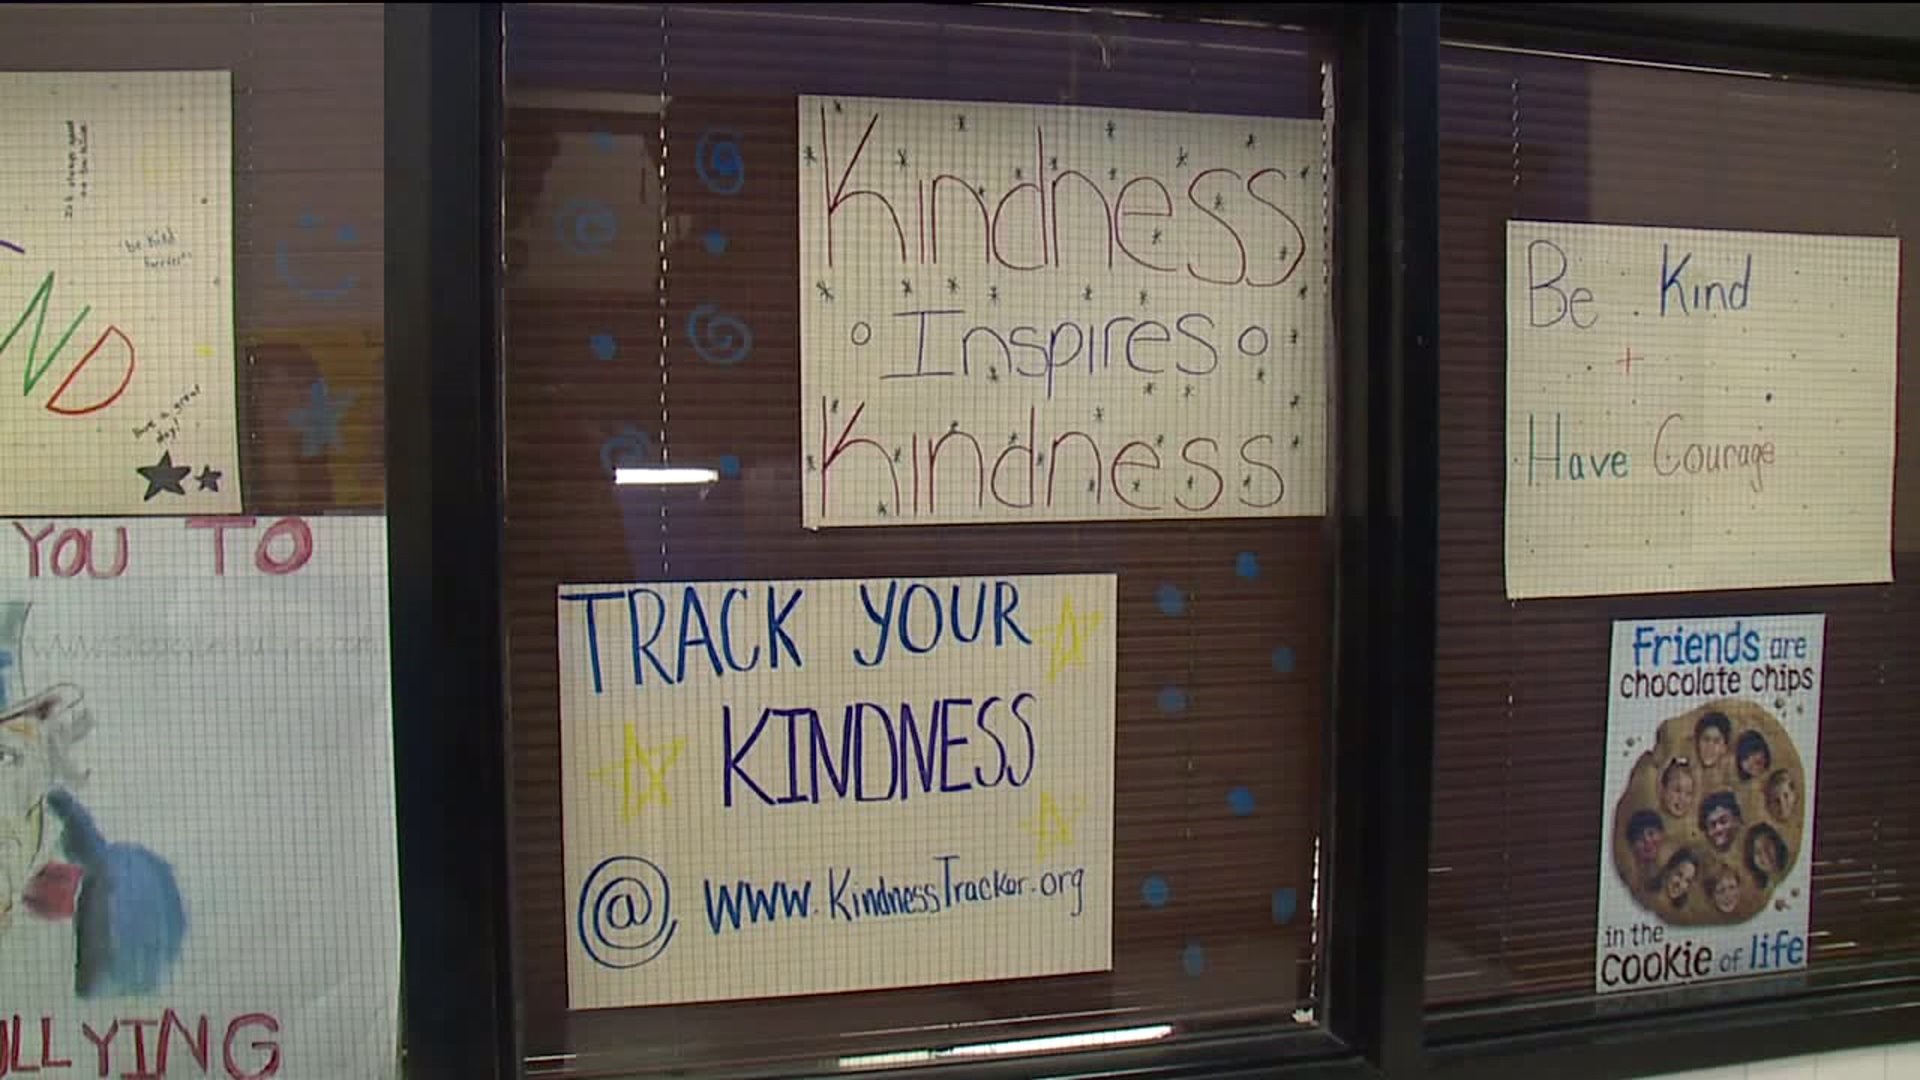 Keeping Track of Kindness